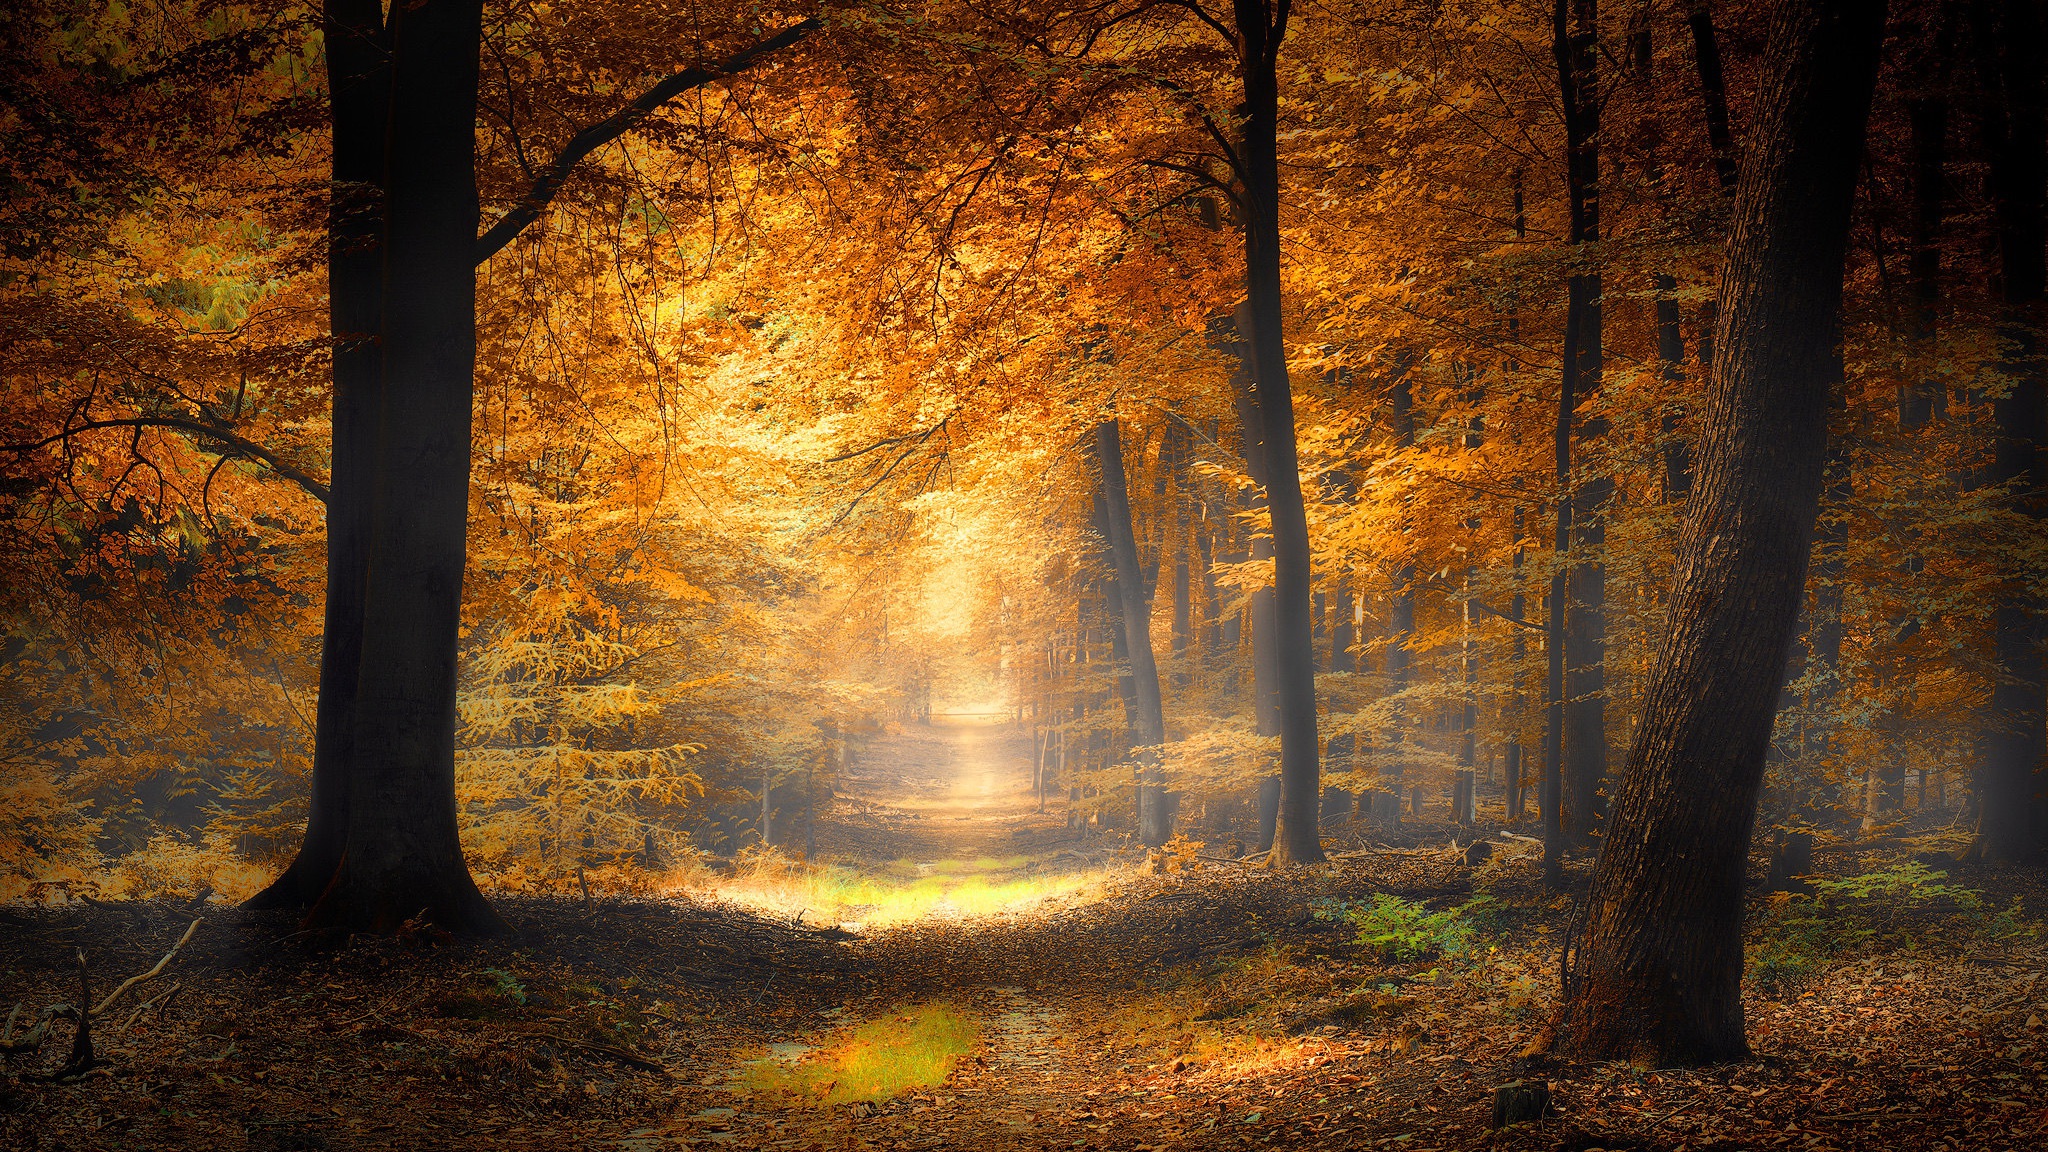 General 2048x1152 nature outdoors fall trees sunlight